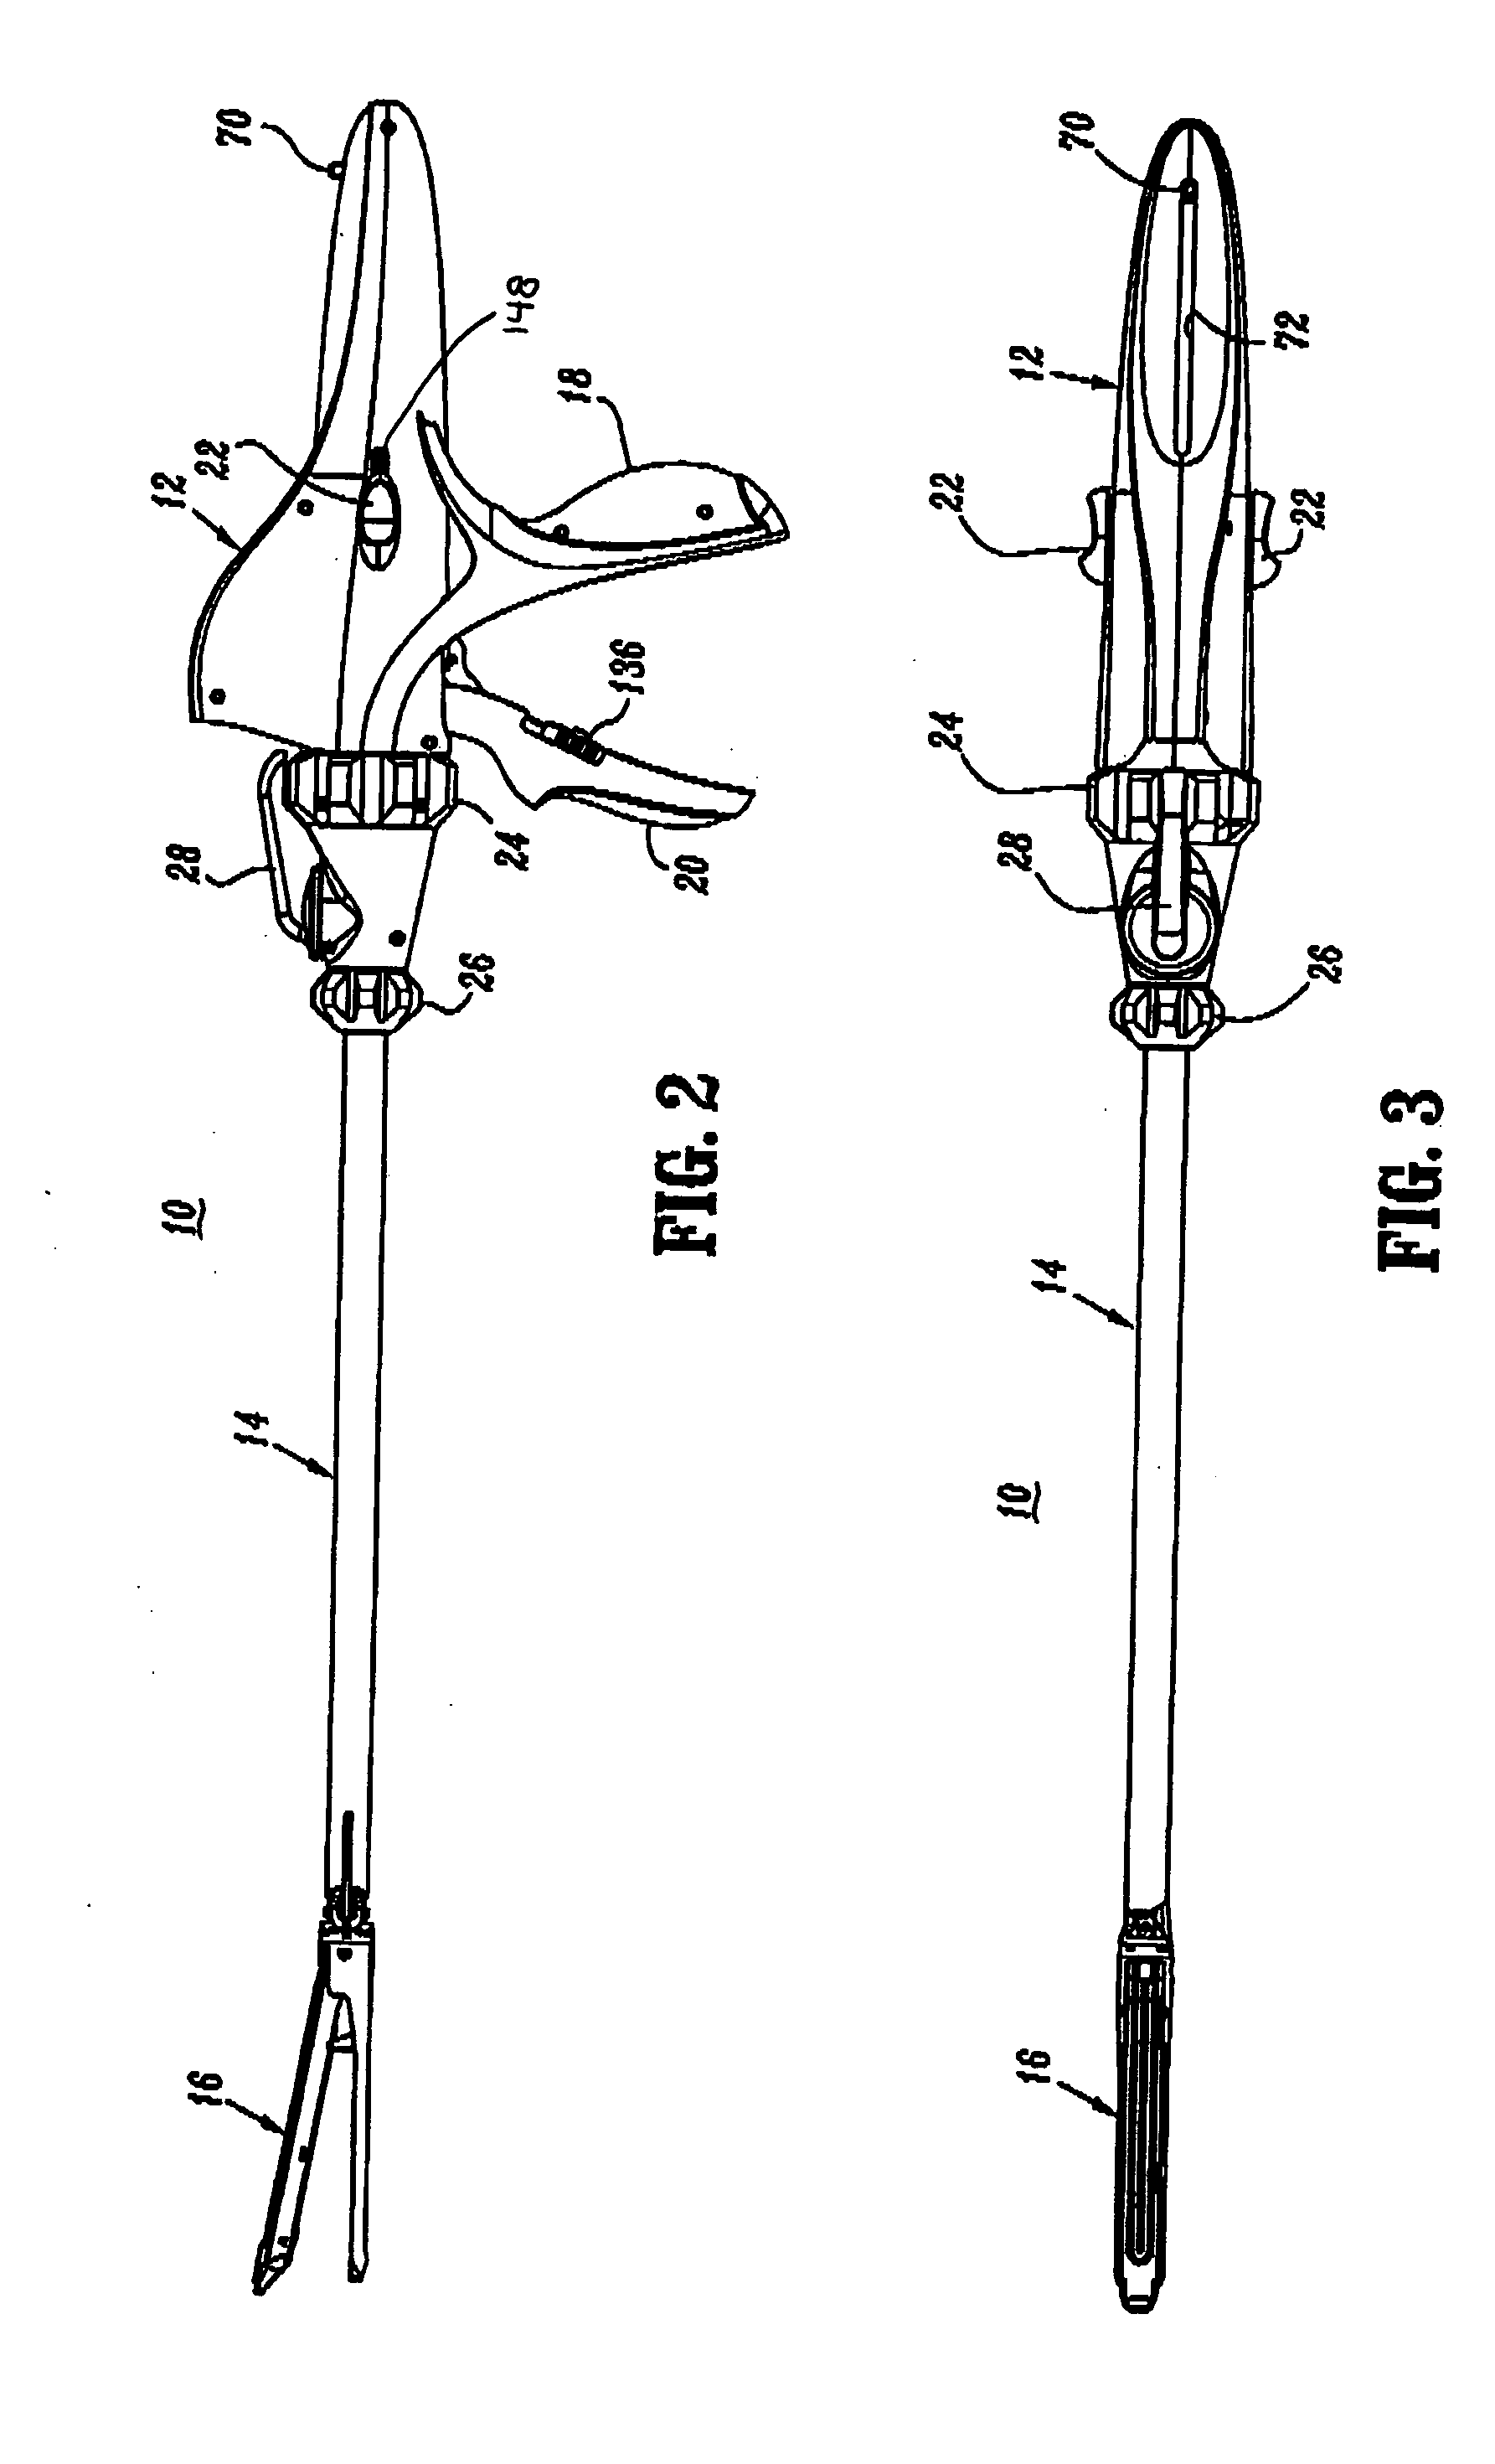 Surgical stapling device with independent tip rotation